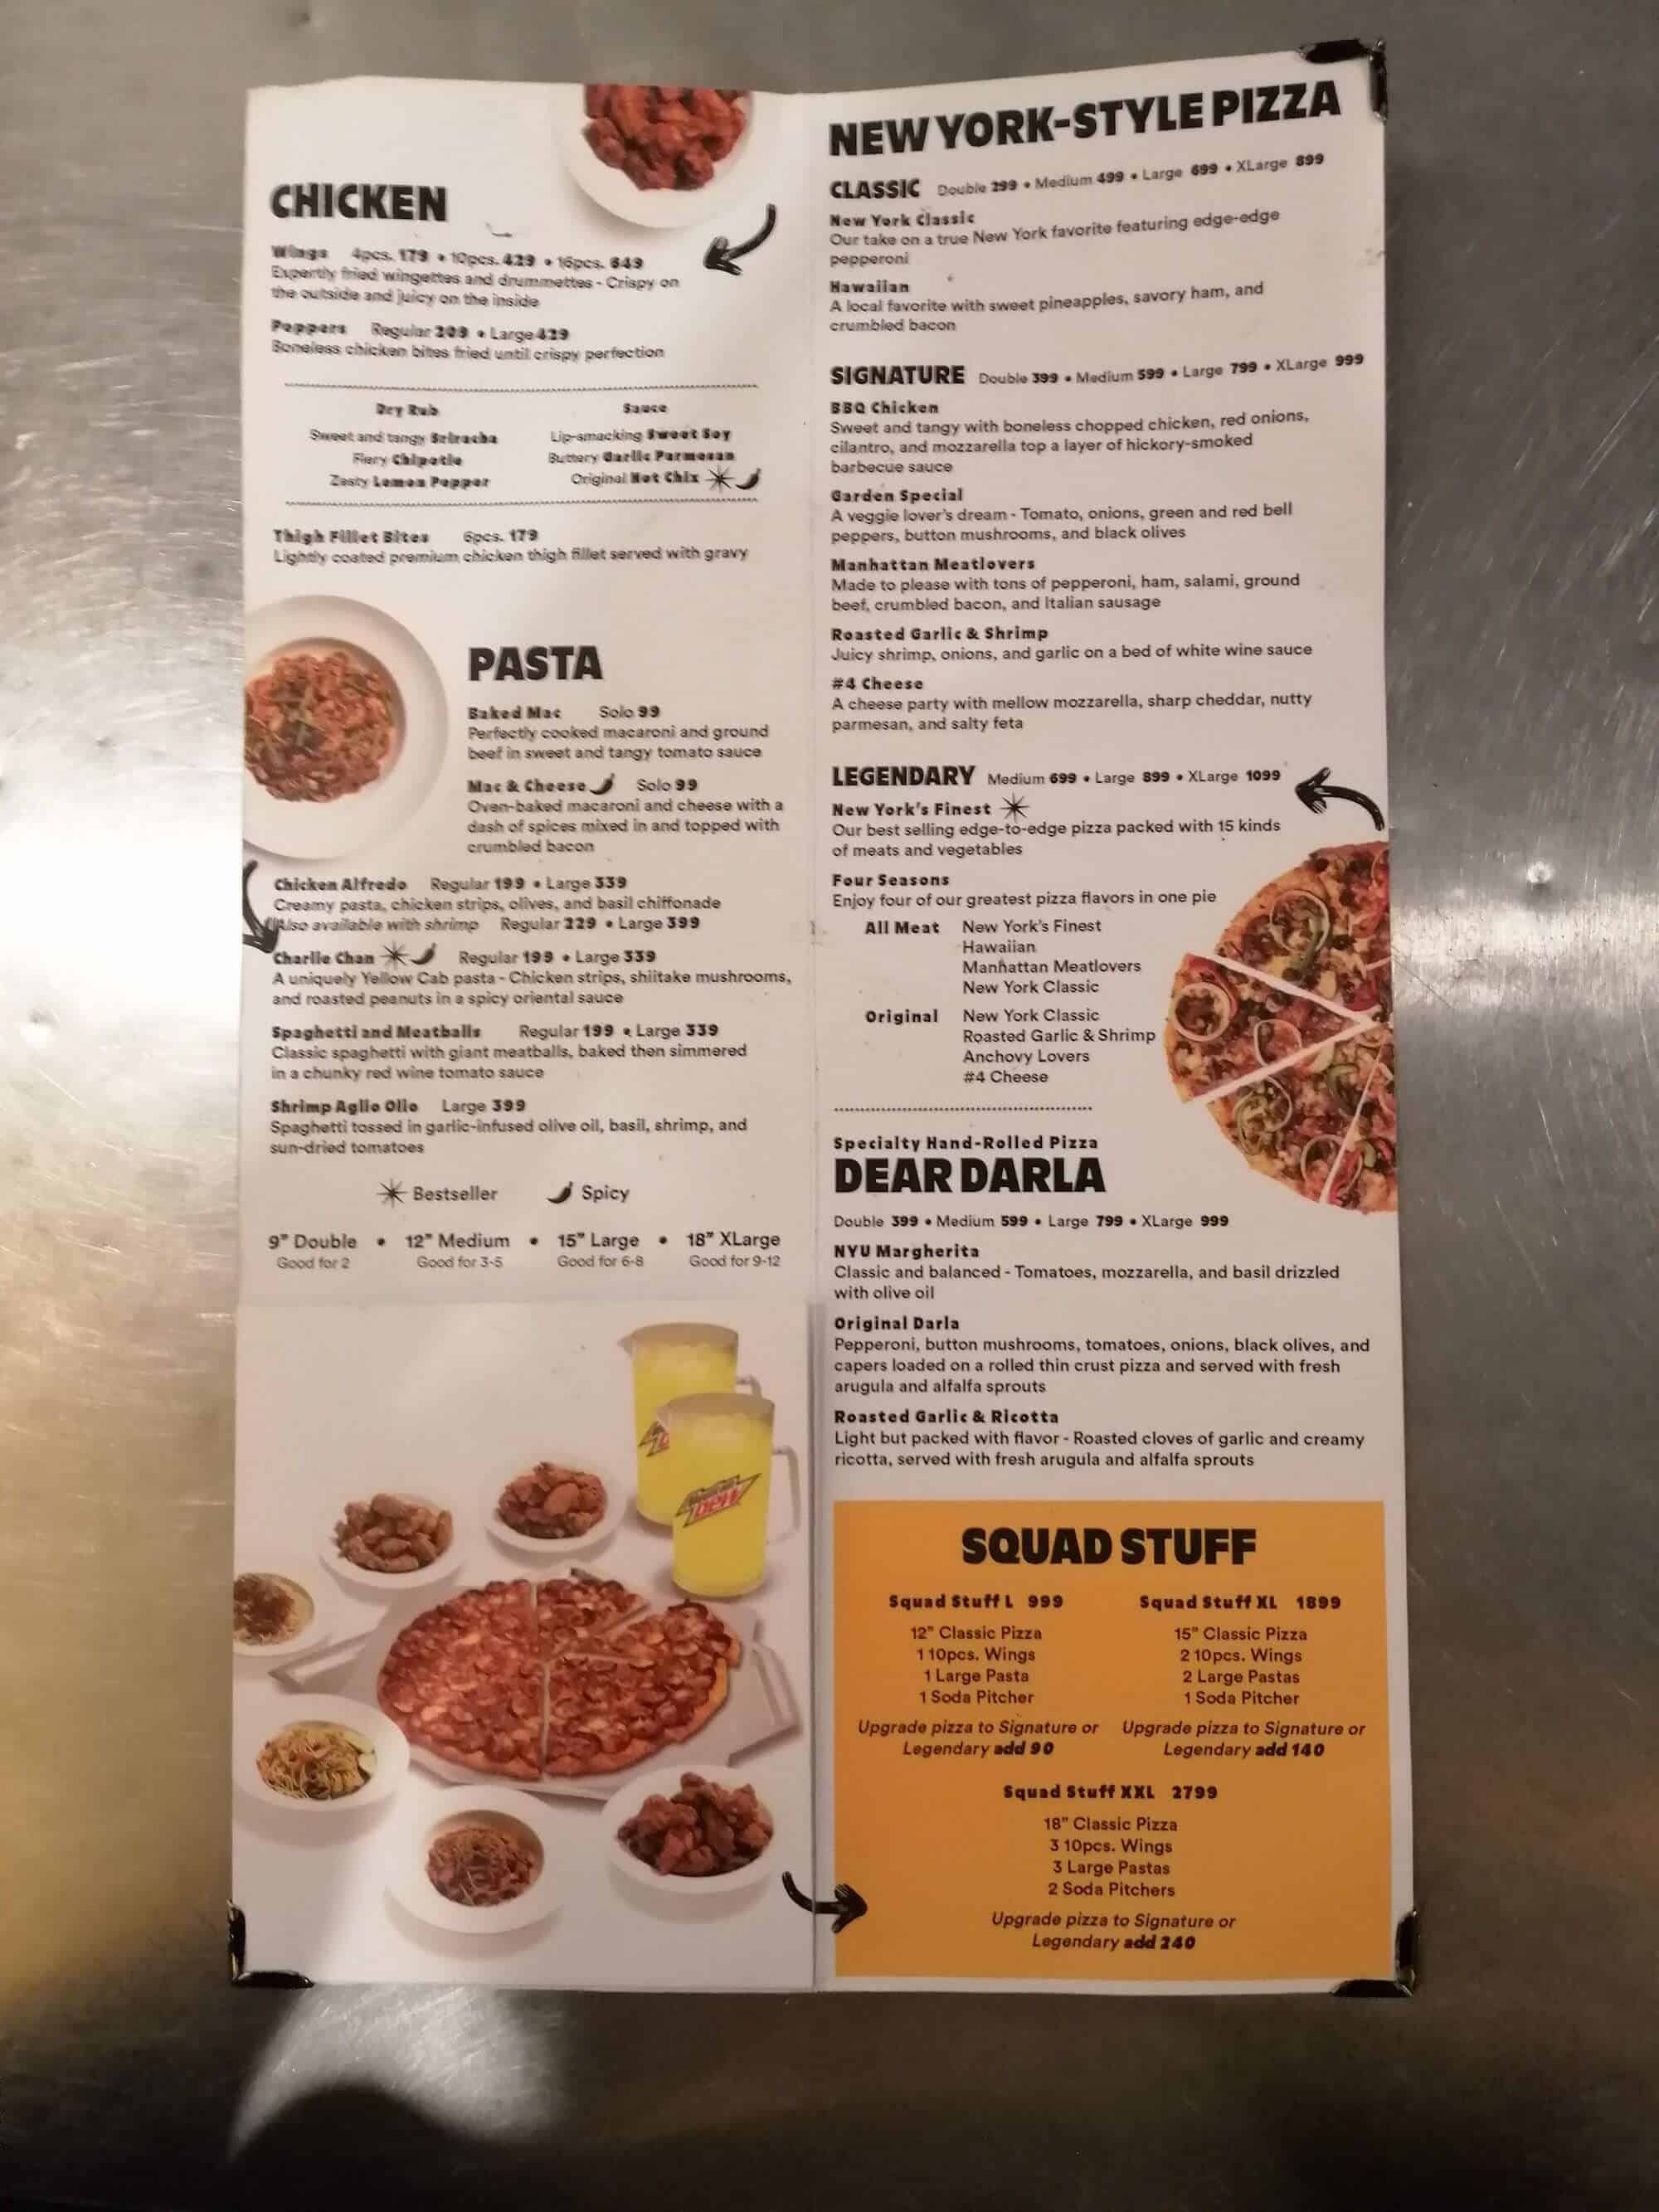 Chicken Pizza, New York Pizza, And Pasta On Yellow Cab Menu